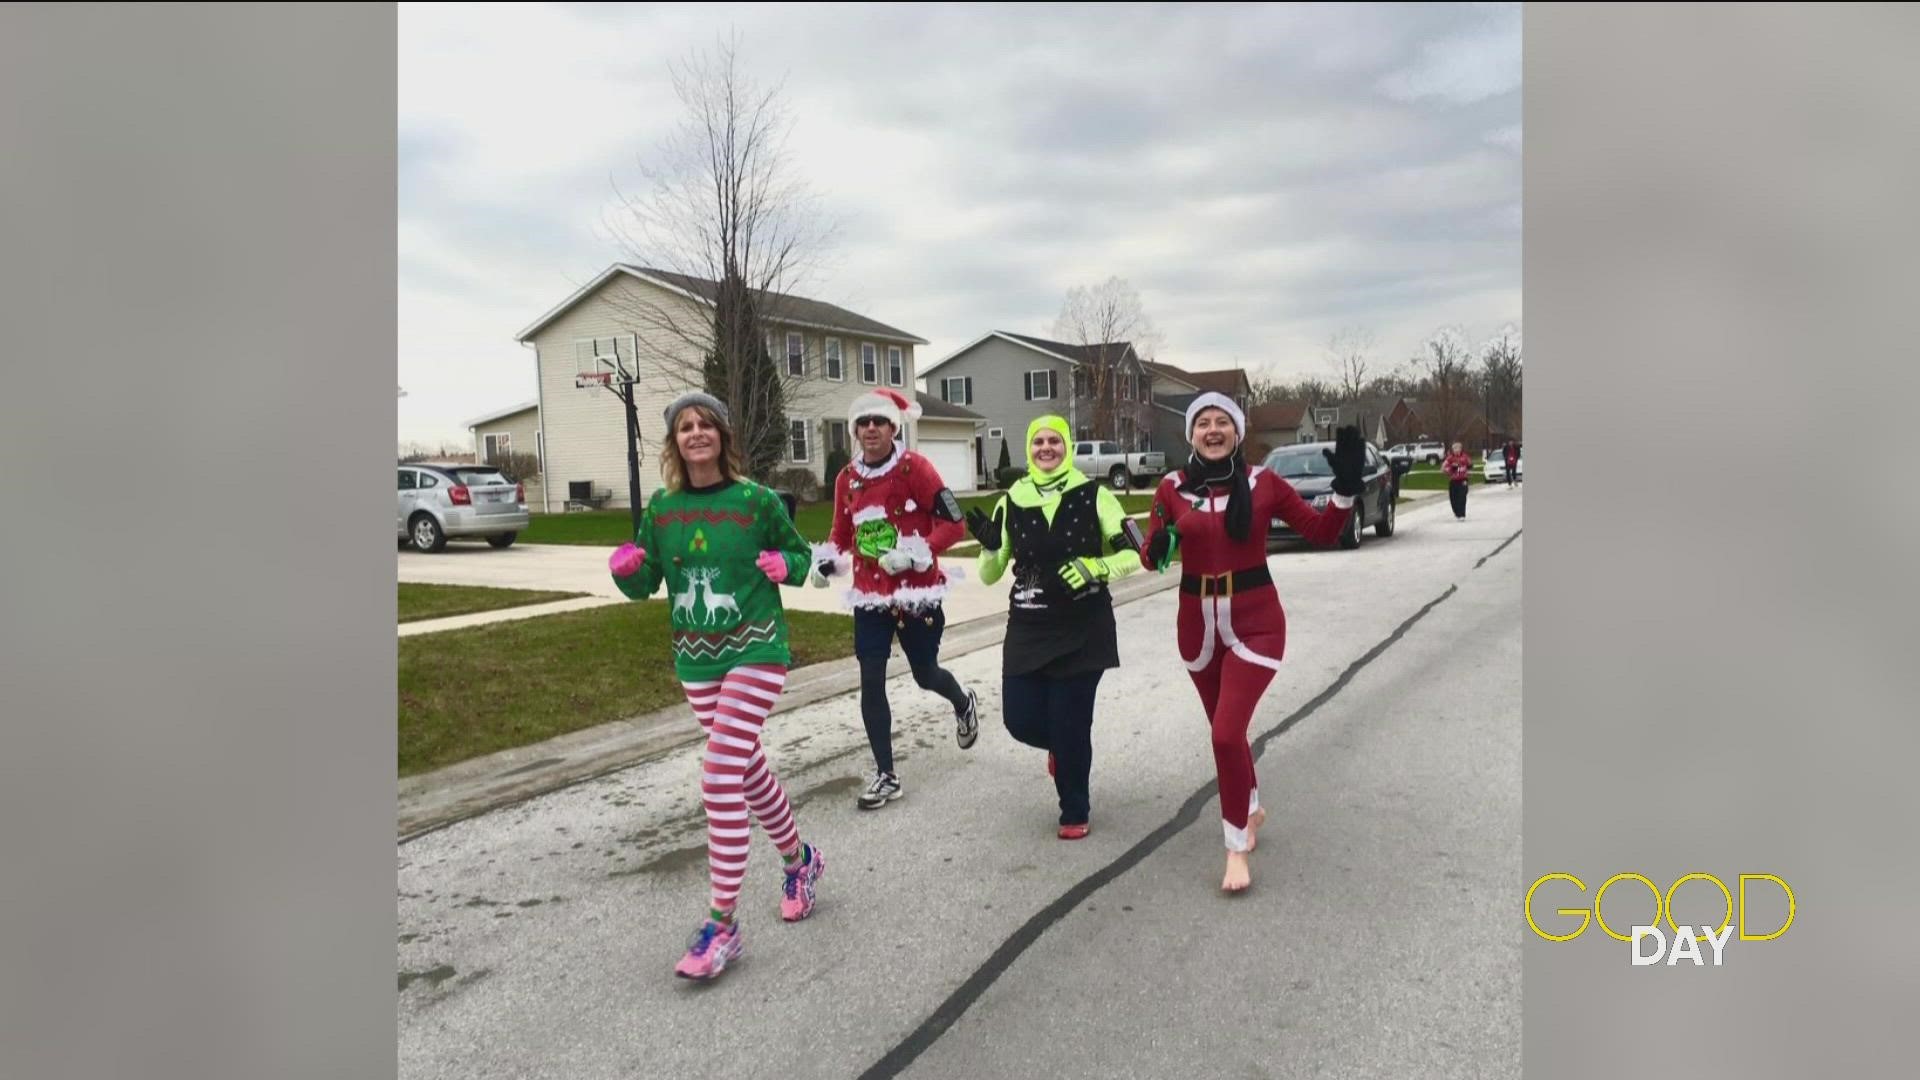 Wear your ugliest Christmas sweater and run a Gibsonburg 5K for a fun, festive time and give back to your community. The run is on Saturday, Dec. 10 at 9 a.m.